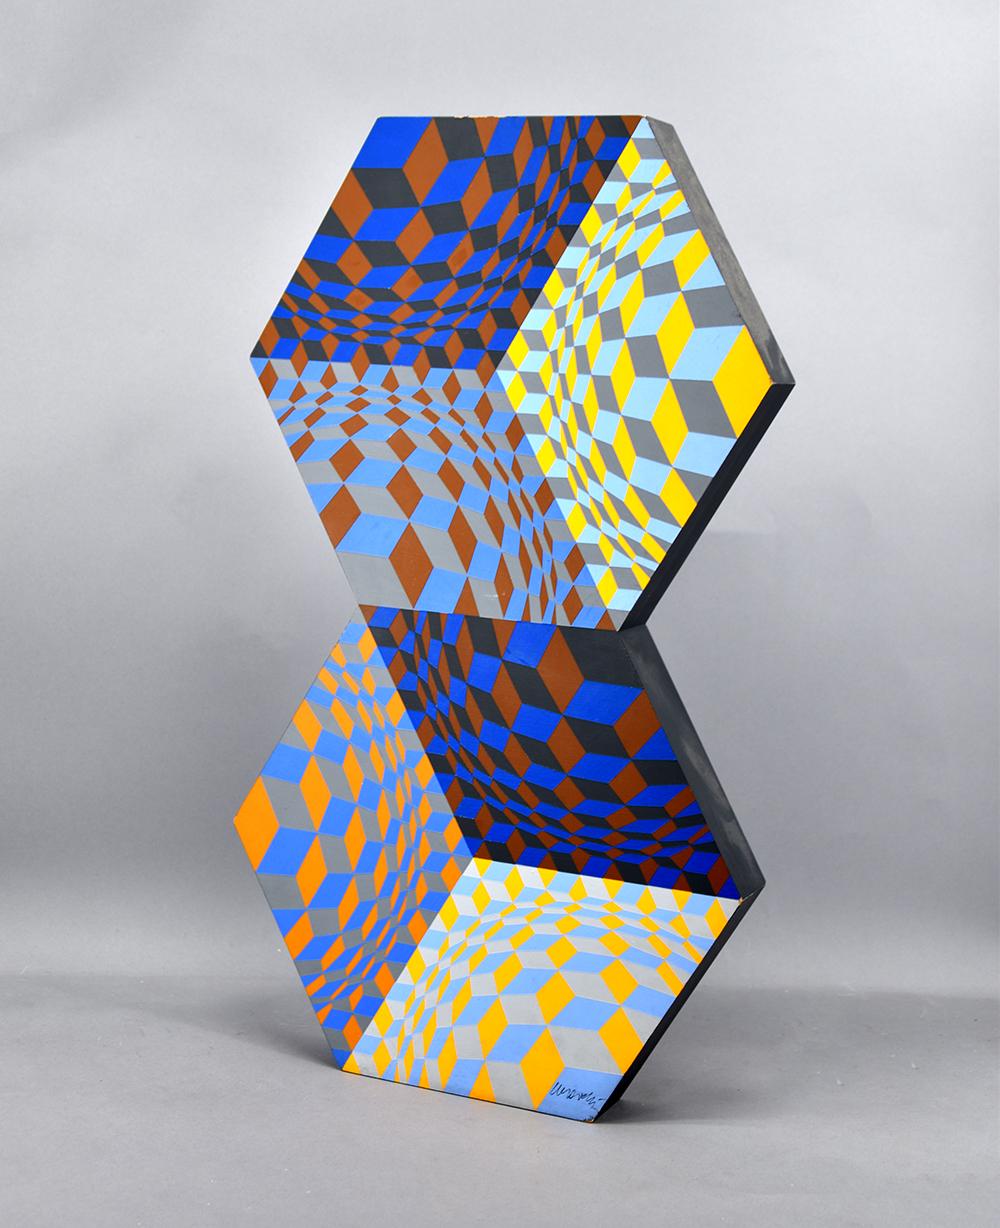 Kettes, 1984 - Op Art Sculpture by Victor Vasarely